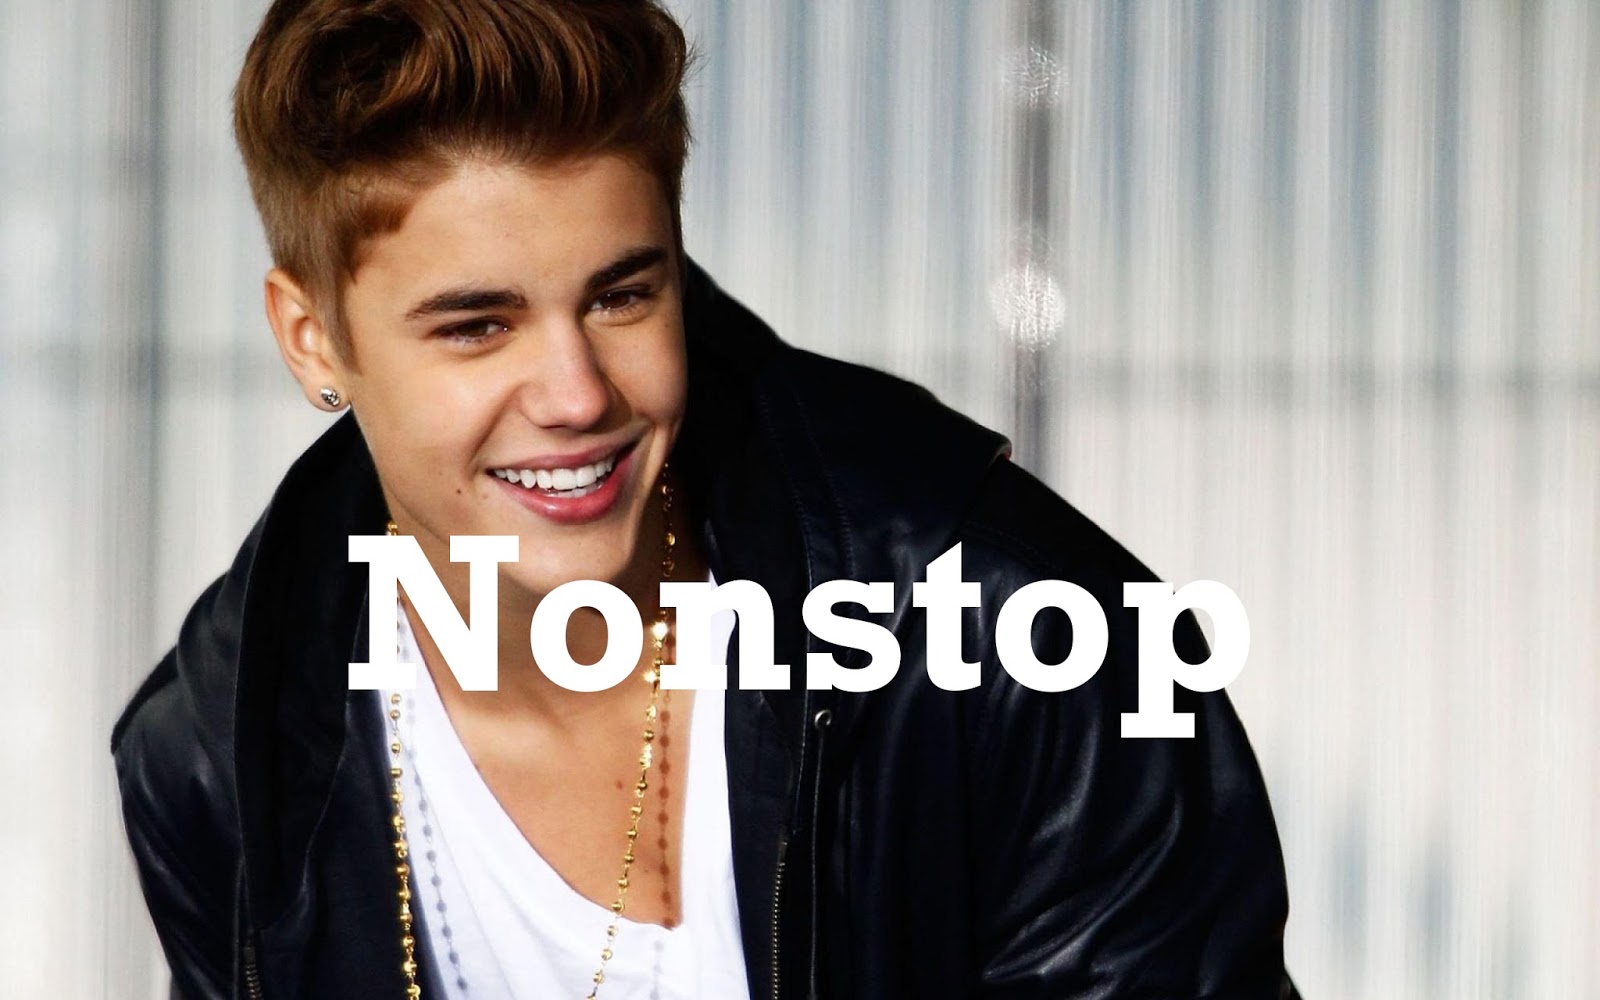 Free Direct Download Nonstop Mp3 Music: Justin Bieber Nonstop mp3 song